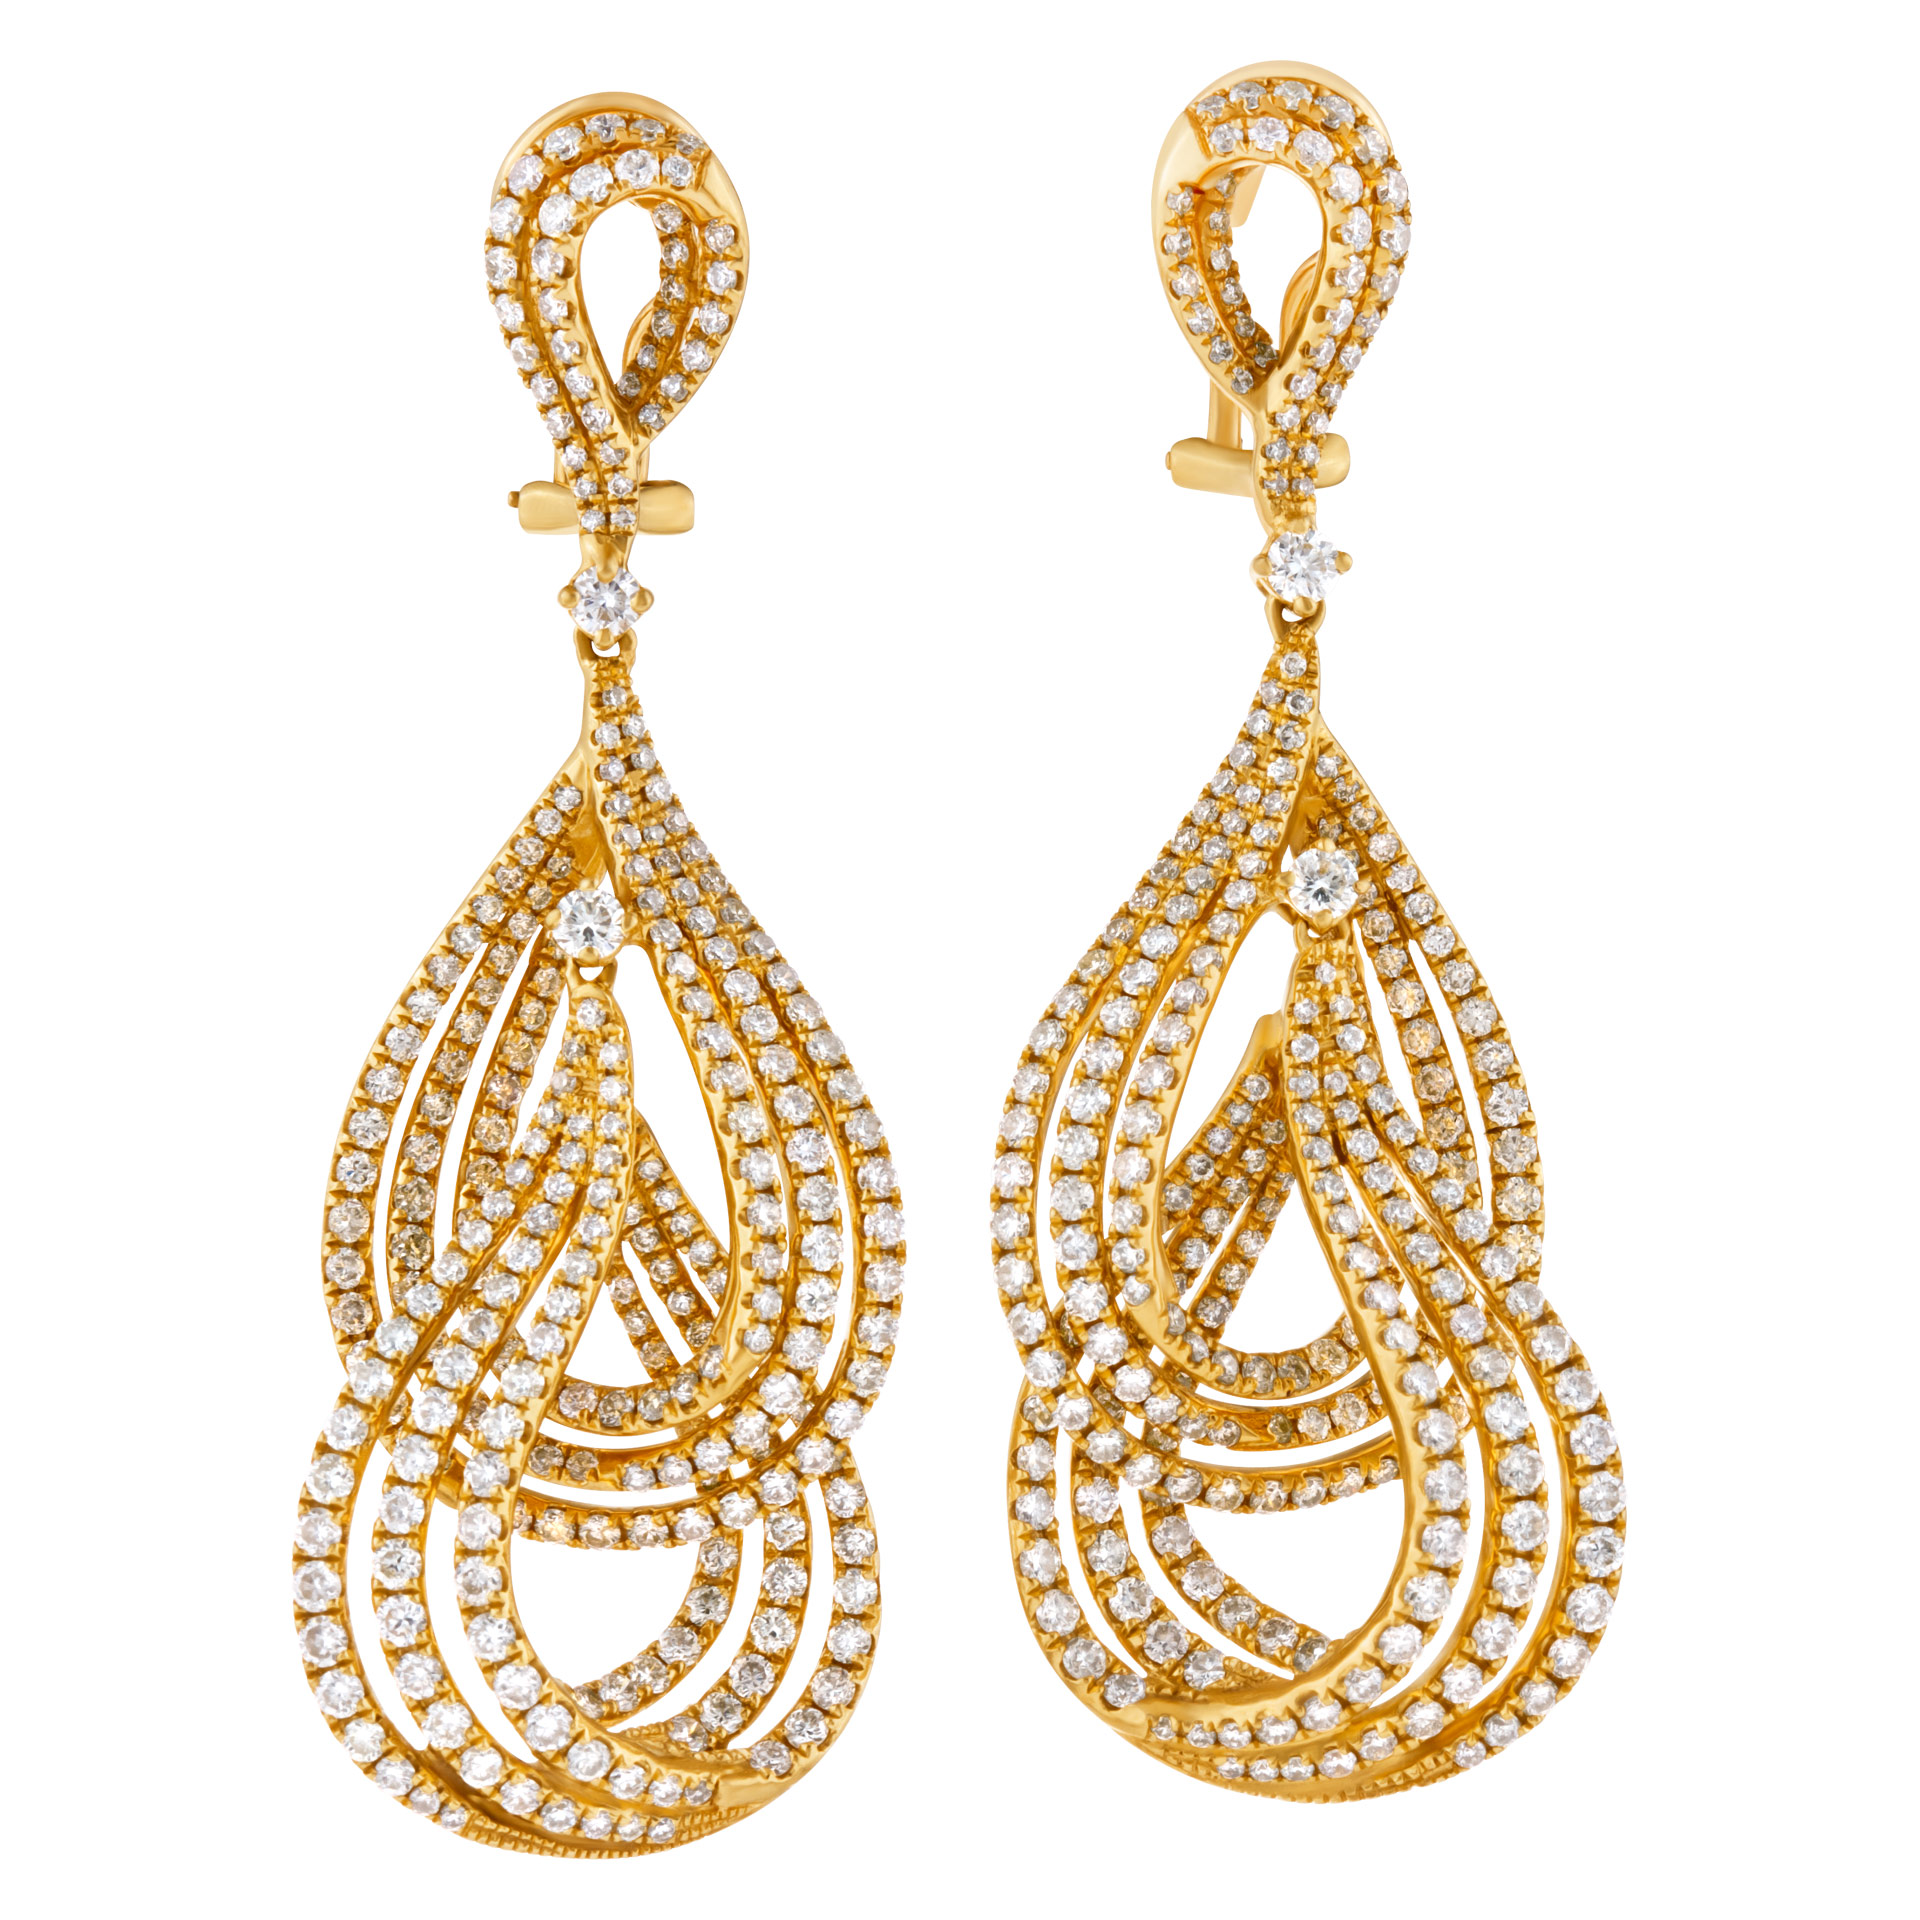 Twisted & cascading drop earrings in 18k yellow gold with 4.96 carats image 1